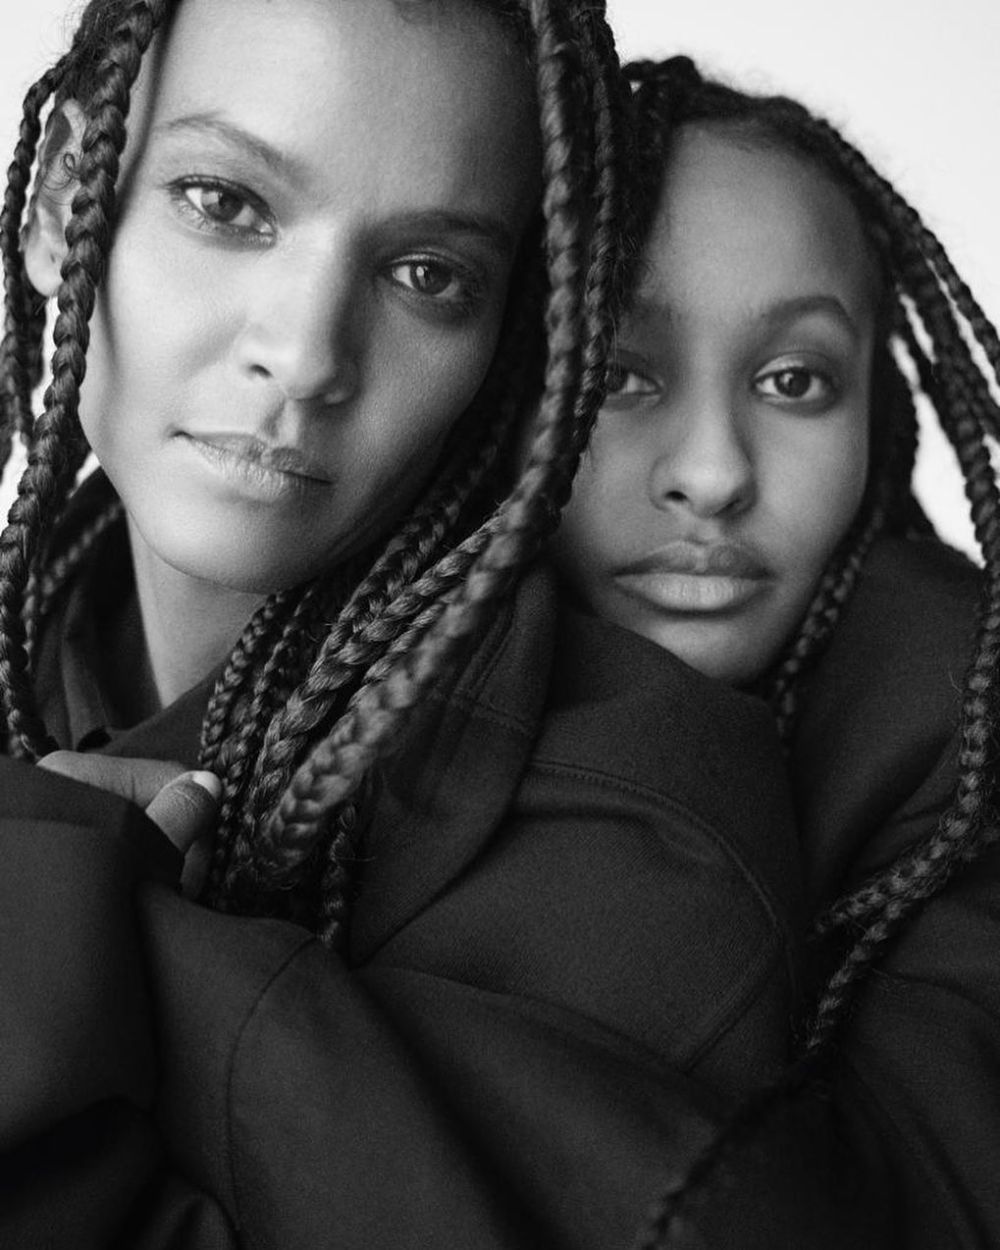 Liya Kebede and Raee in Paris Bookstores with Louis Vuitton